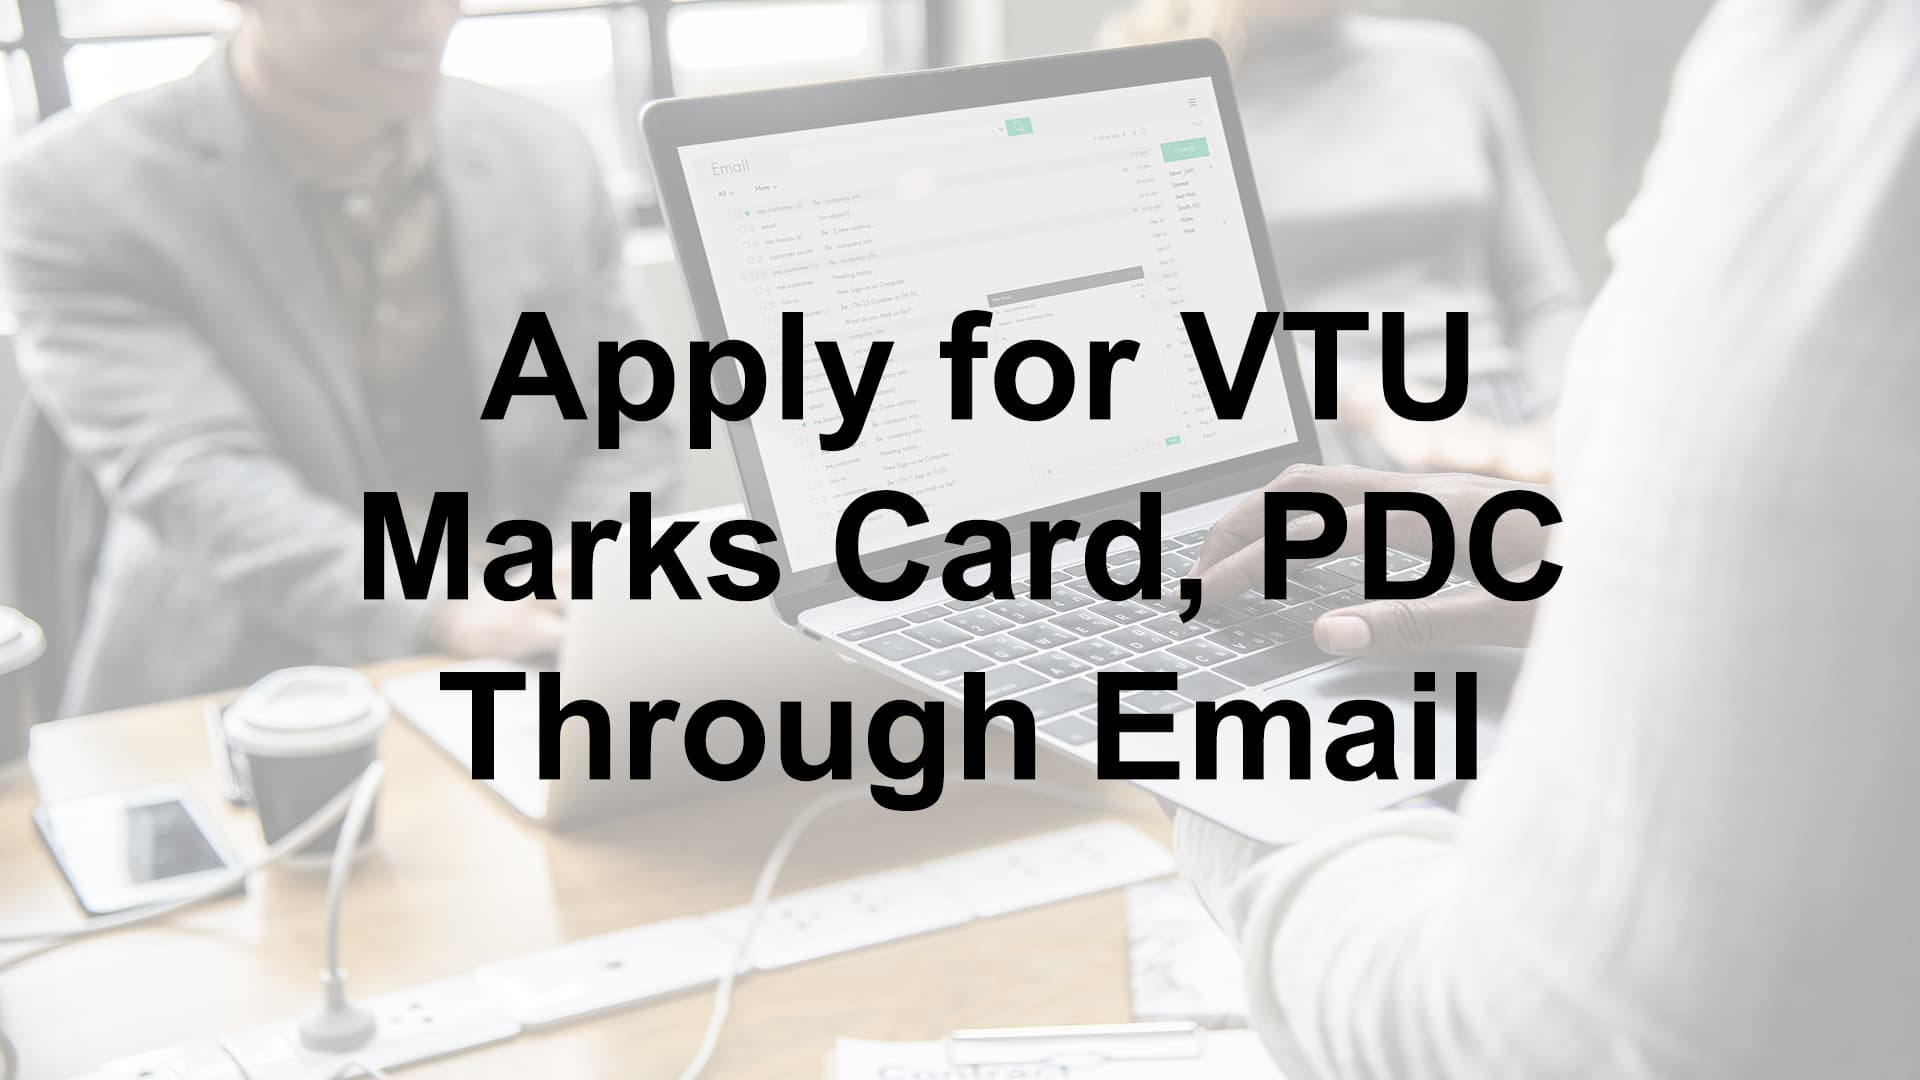 Apply for VTU Marks Card, PDC Through Email